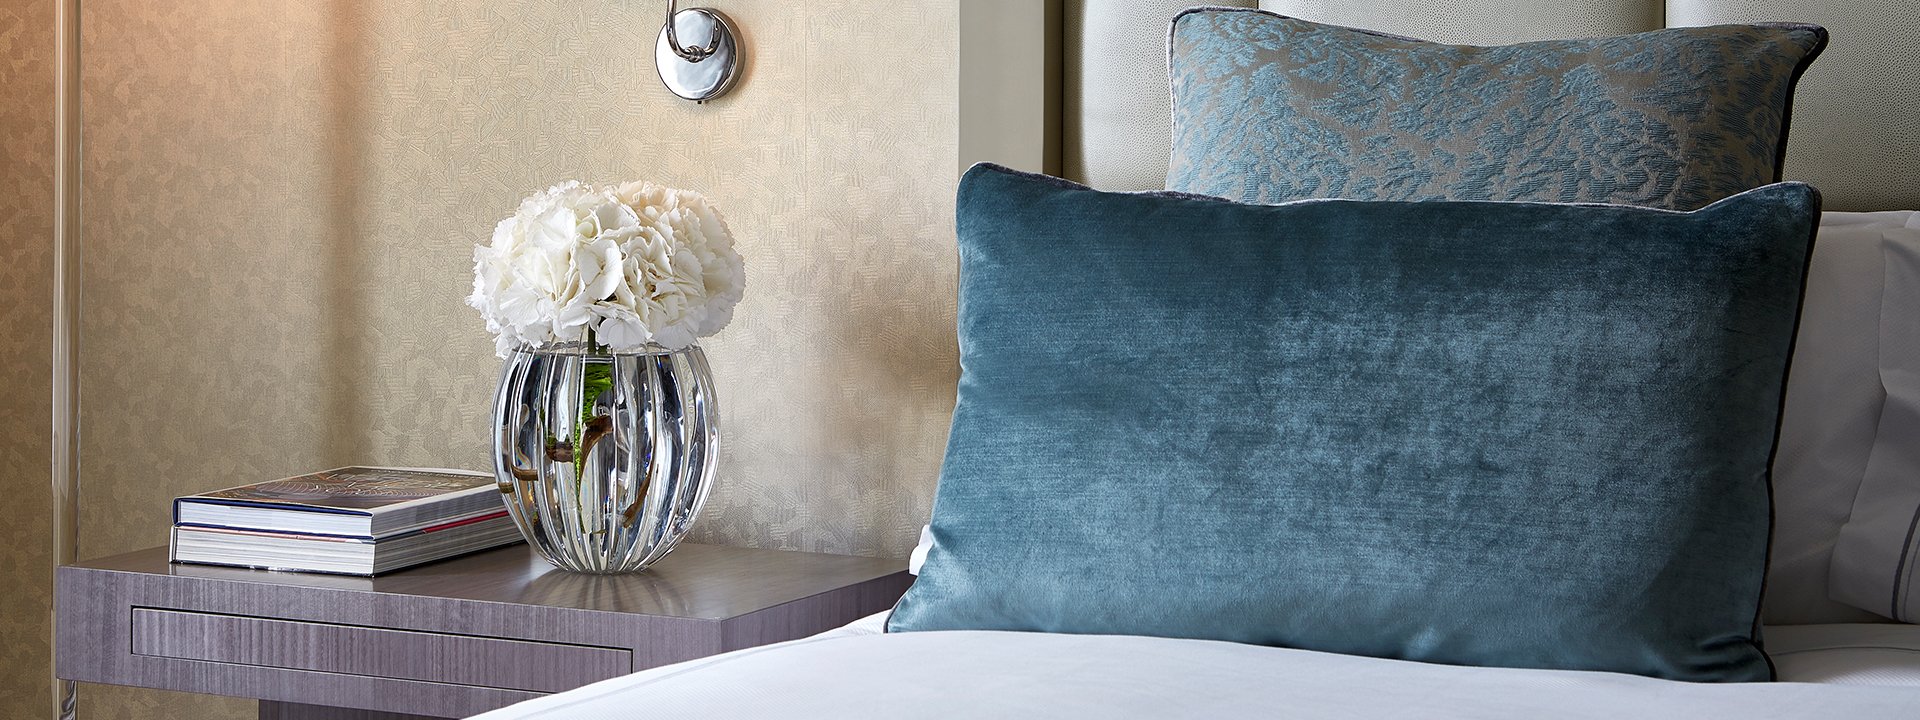 Rich fabrics and luxurious designs of blue cushions in the Chelsea suite, with a white flower arrangement.